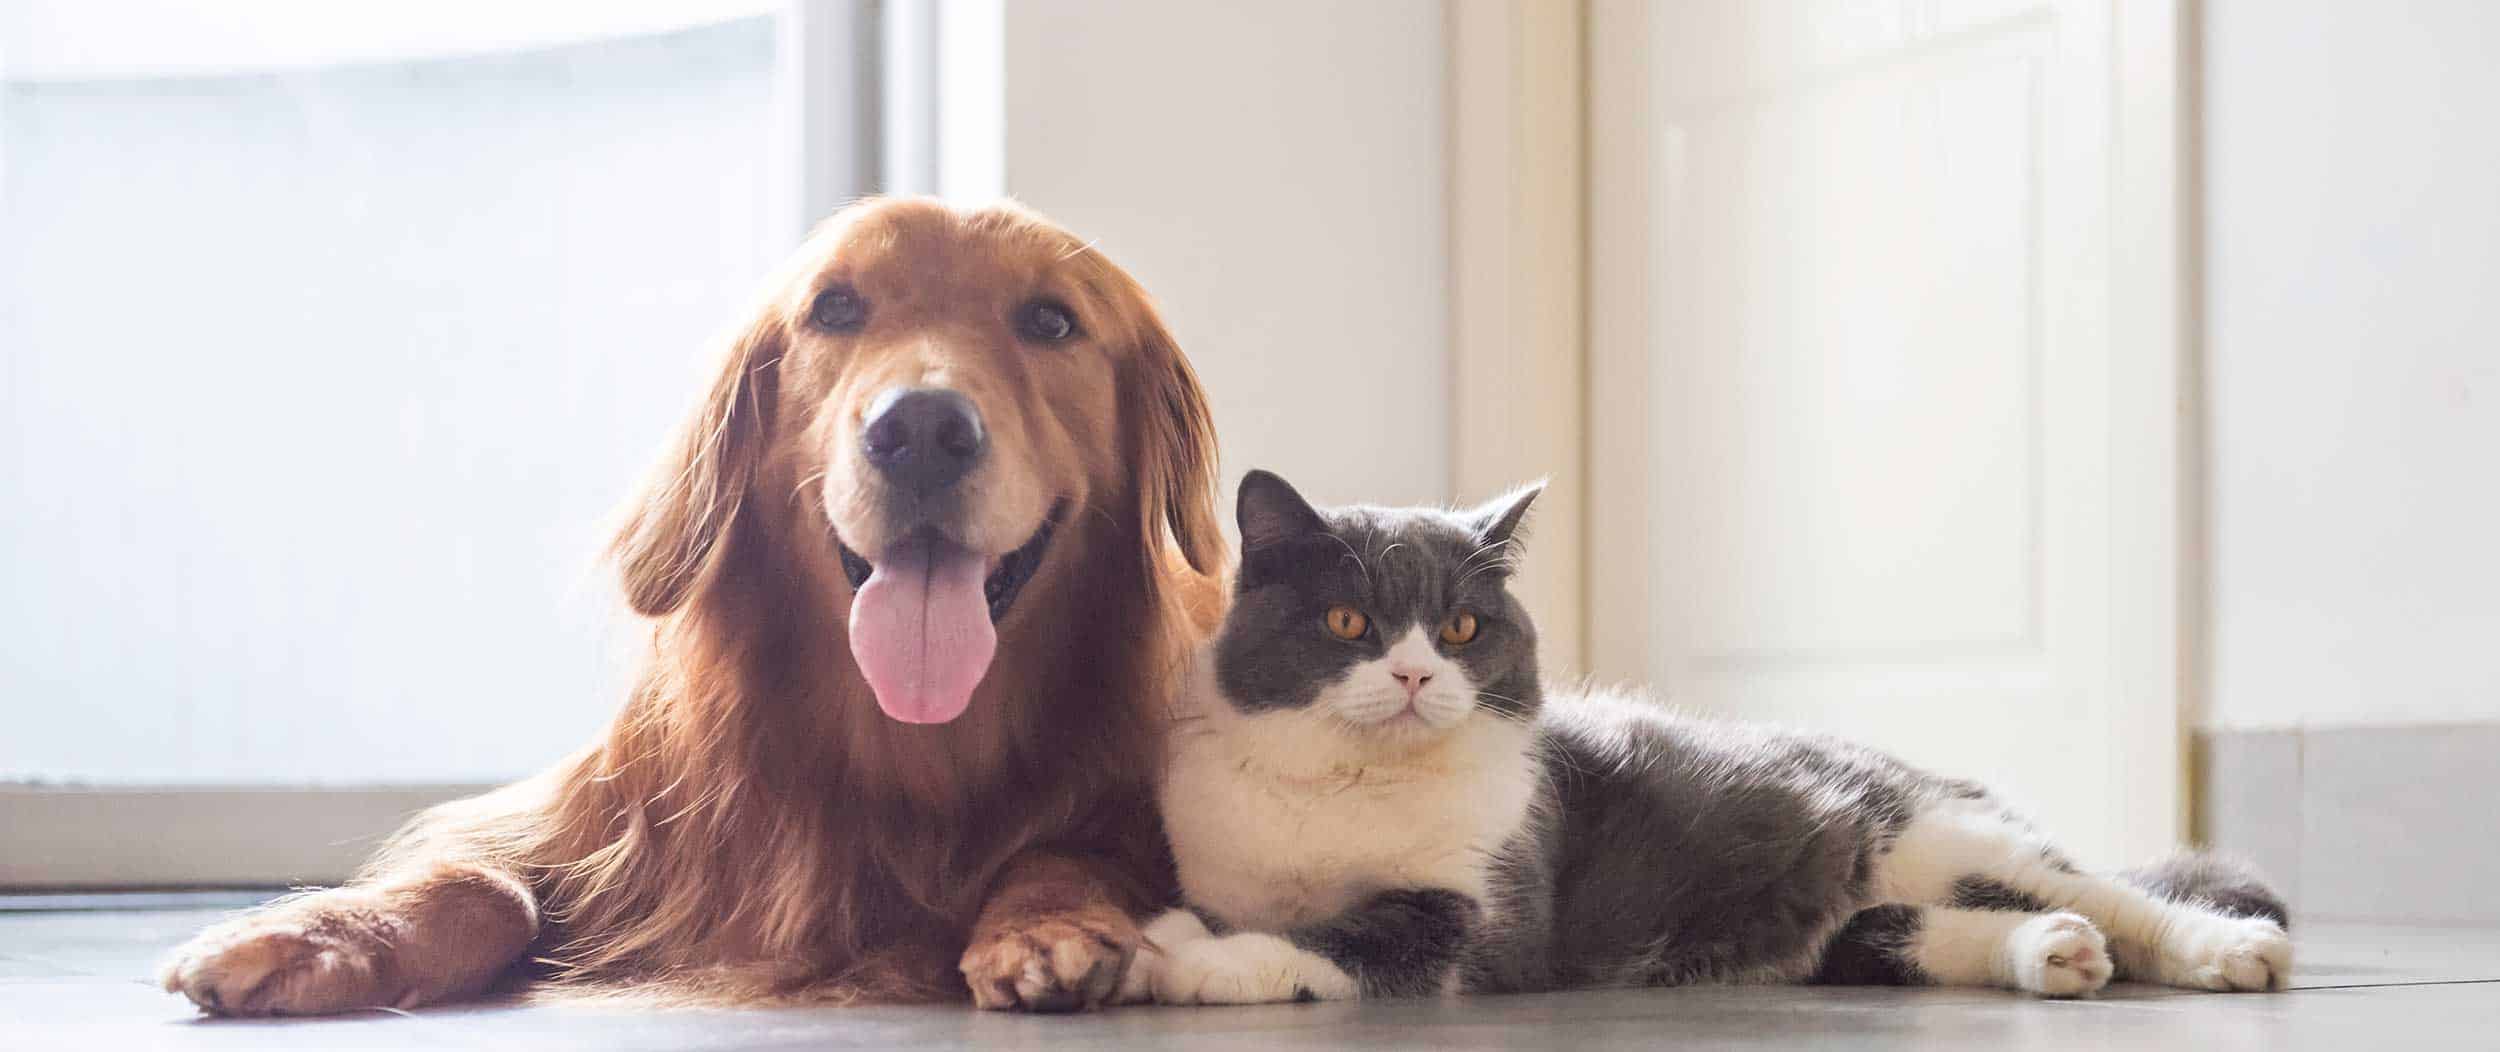 A cat and dog snuggling